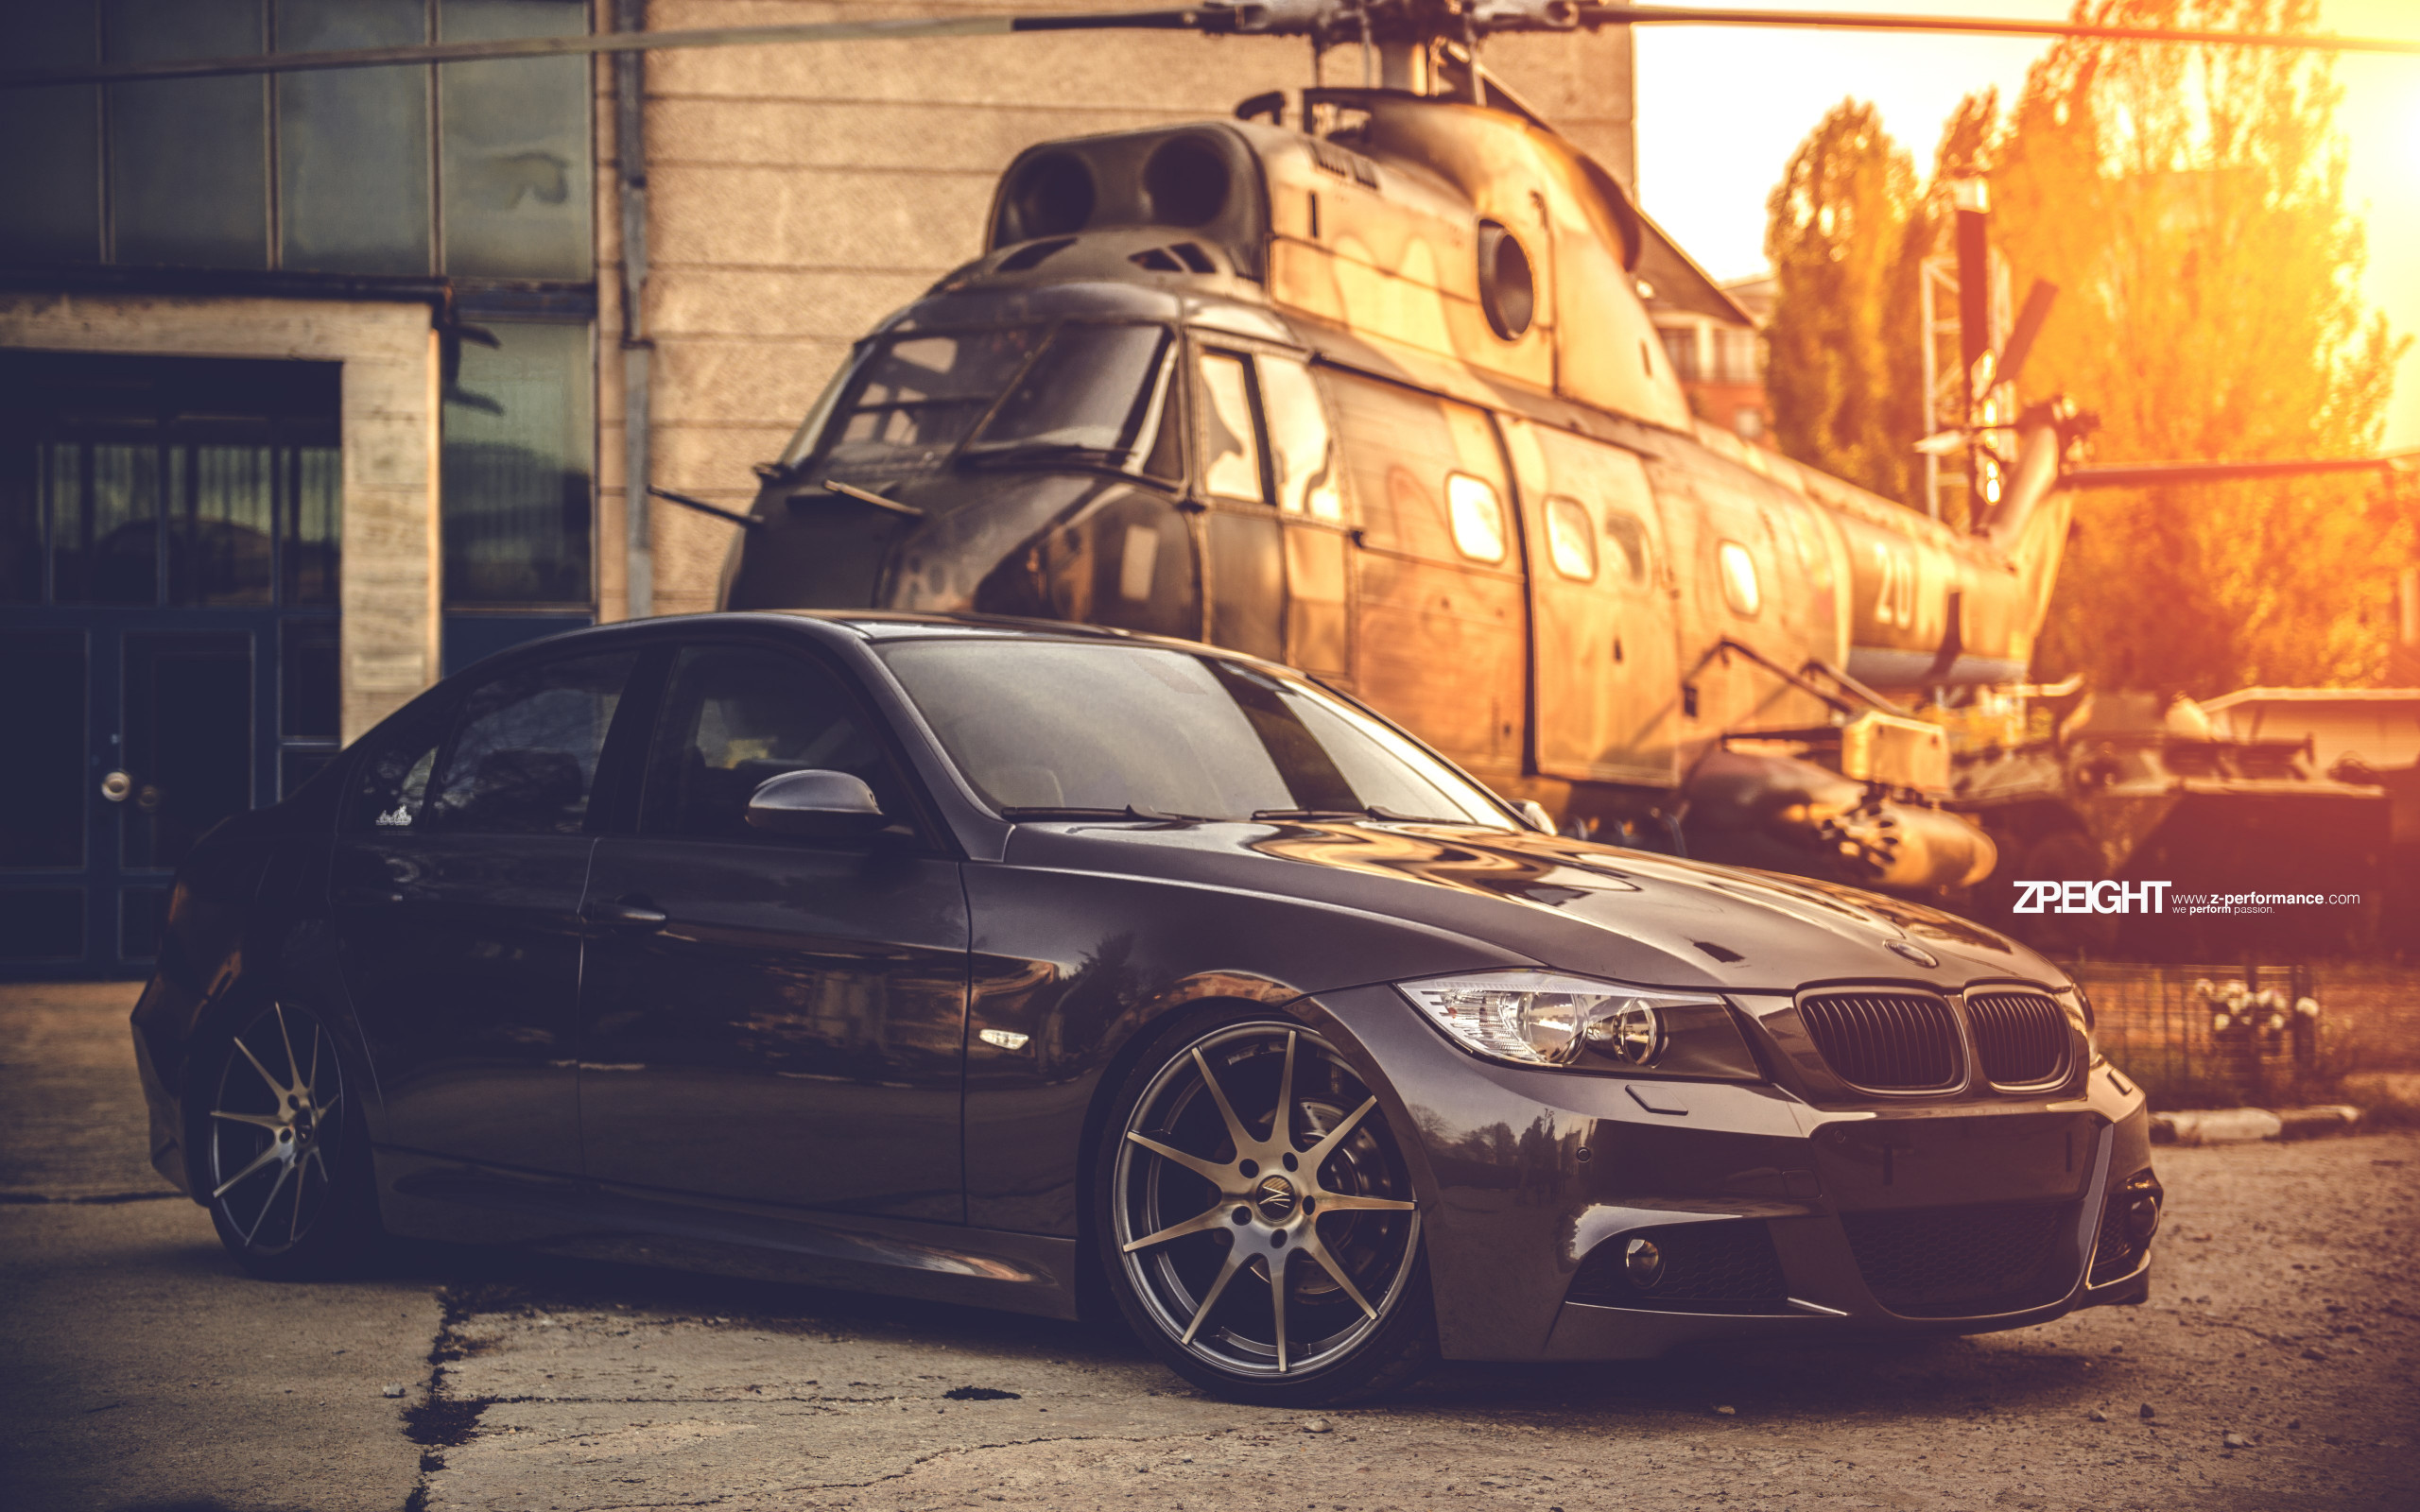 BMW E90 and one helicopter wallpaper 2560x1600